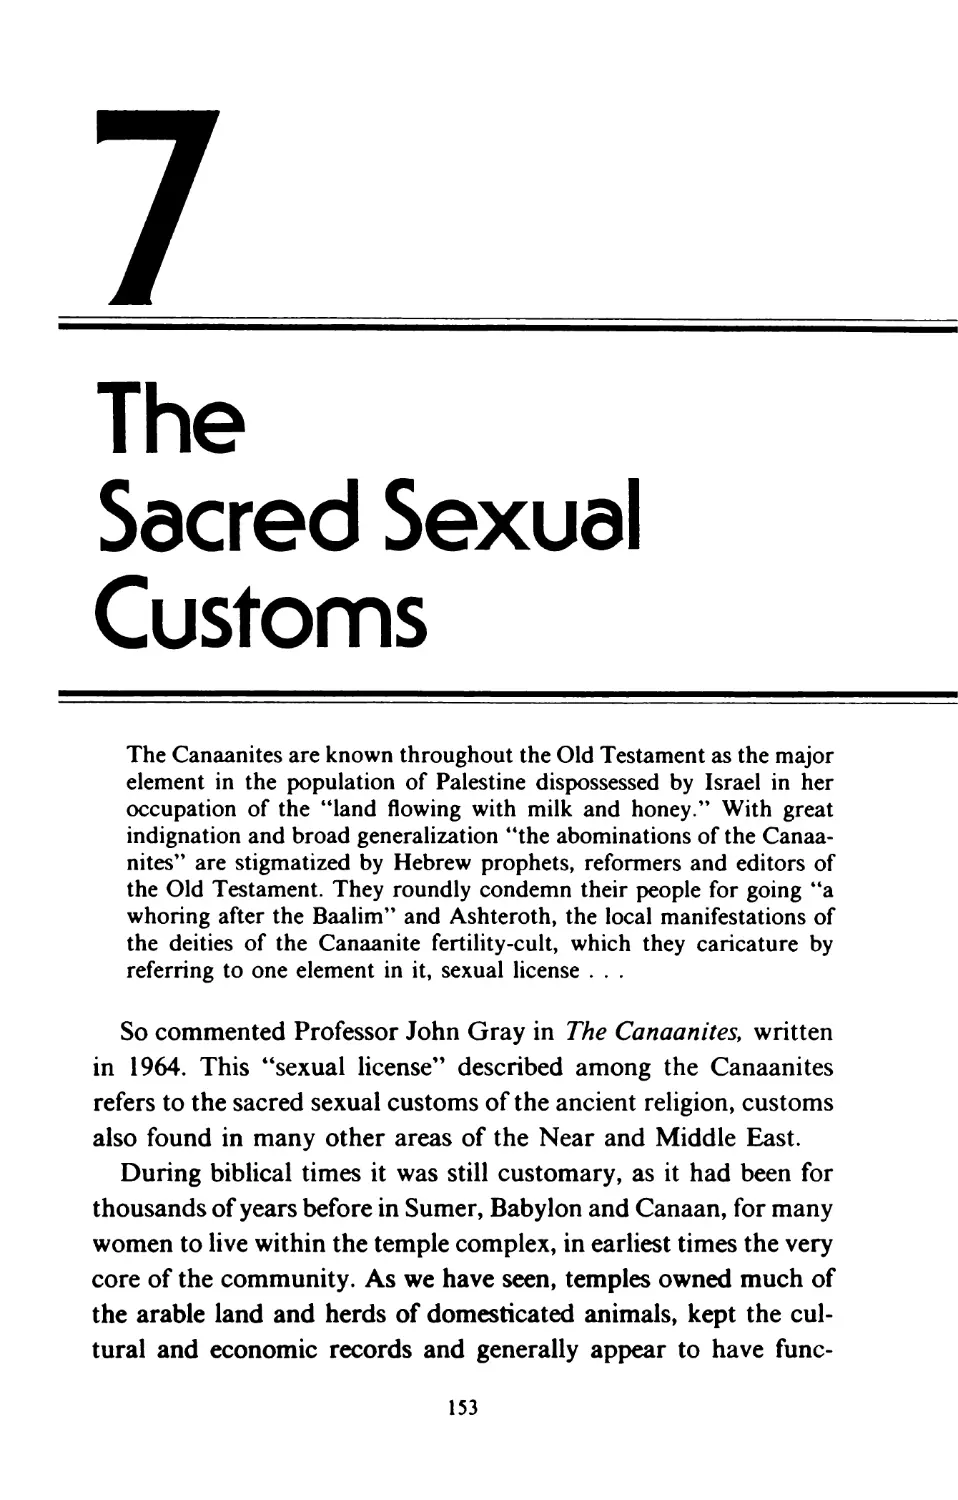 7 The Sacred Sexual Customs